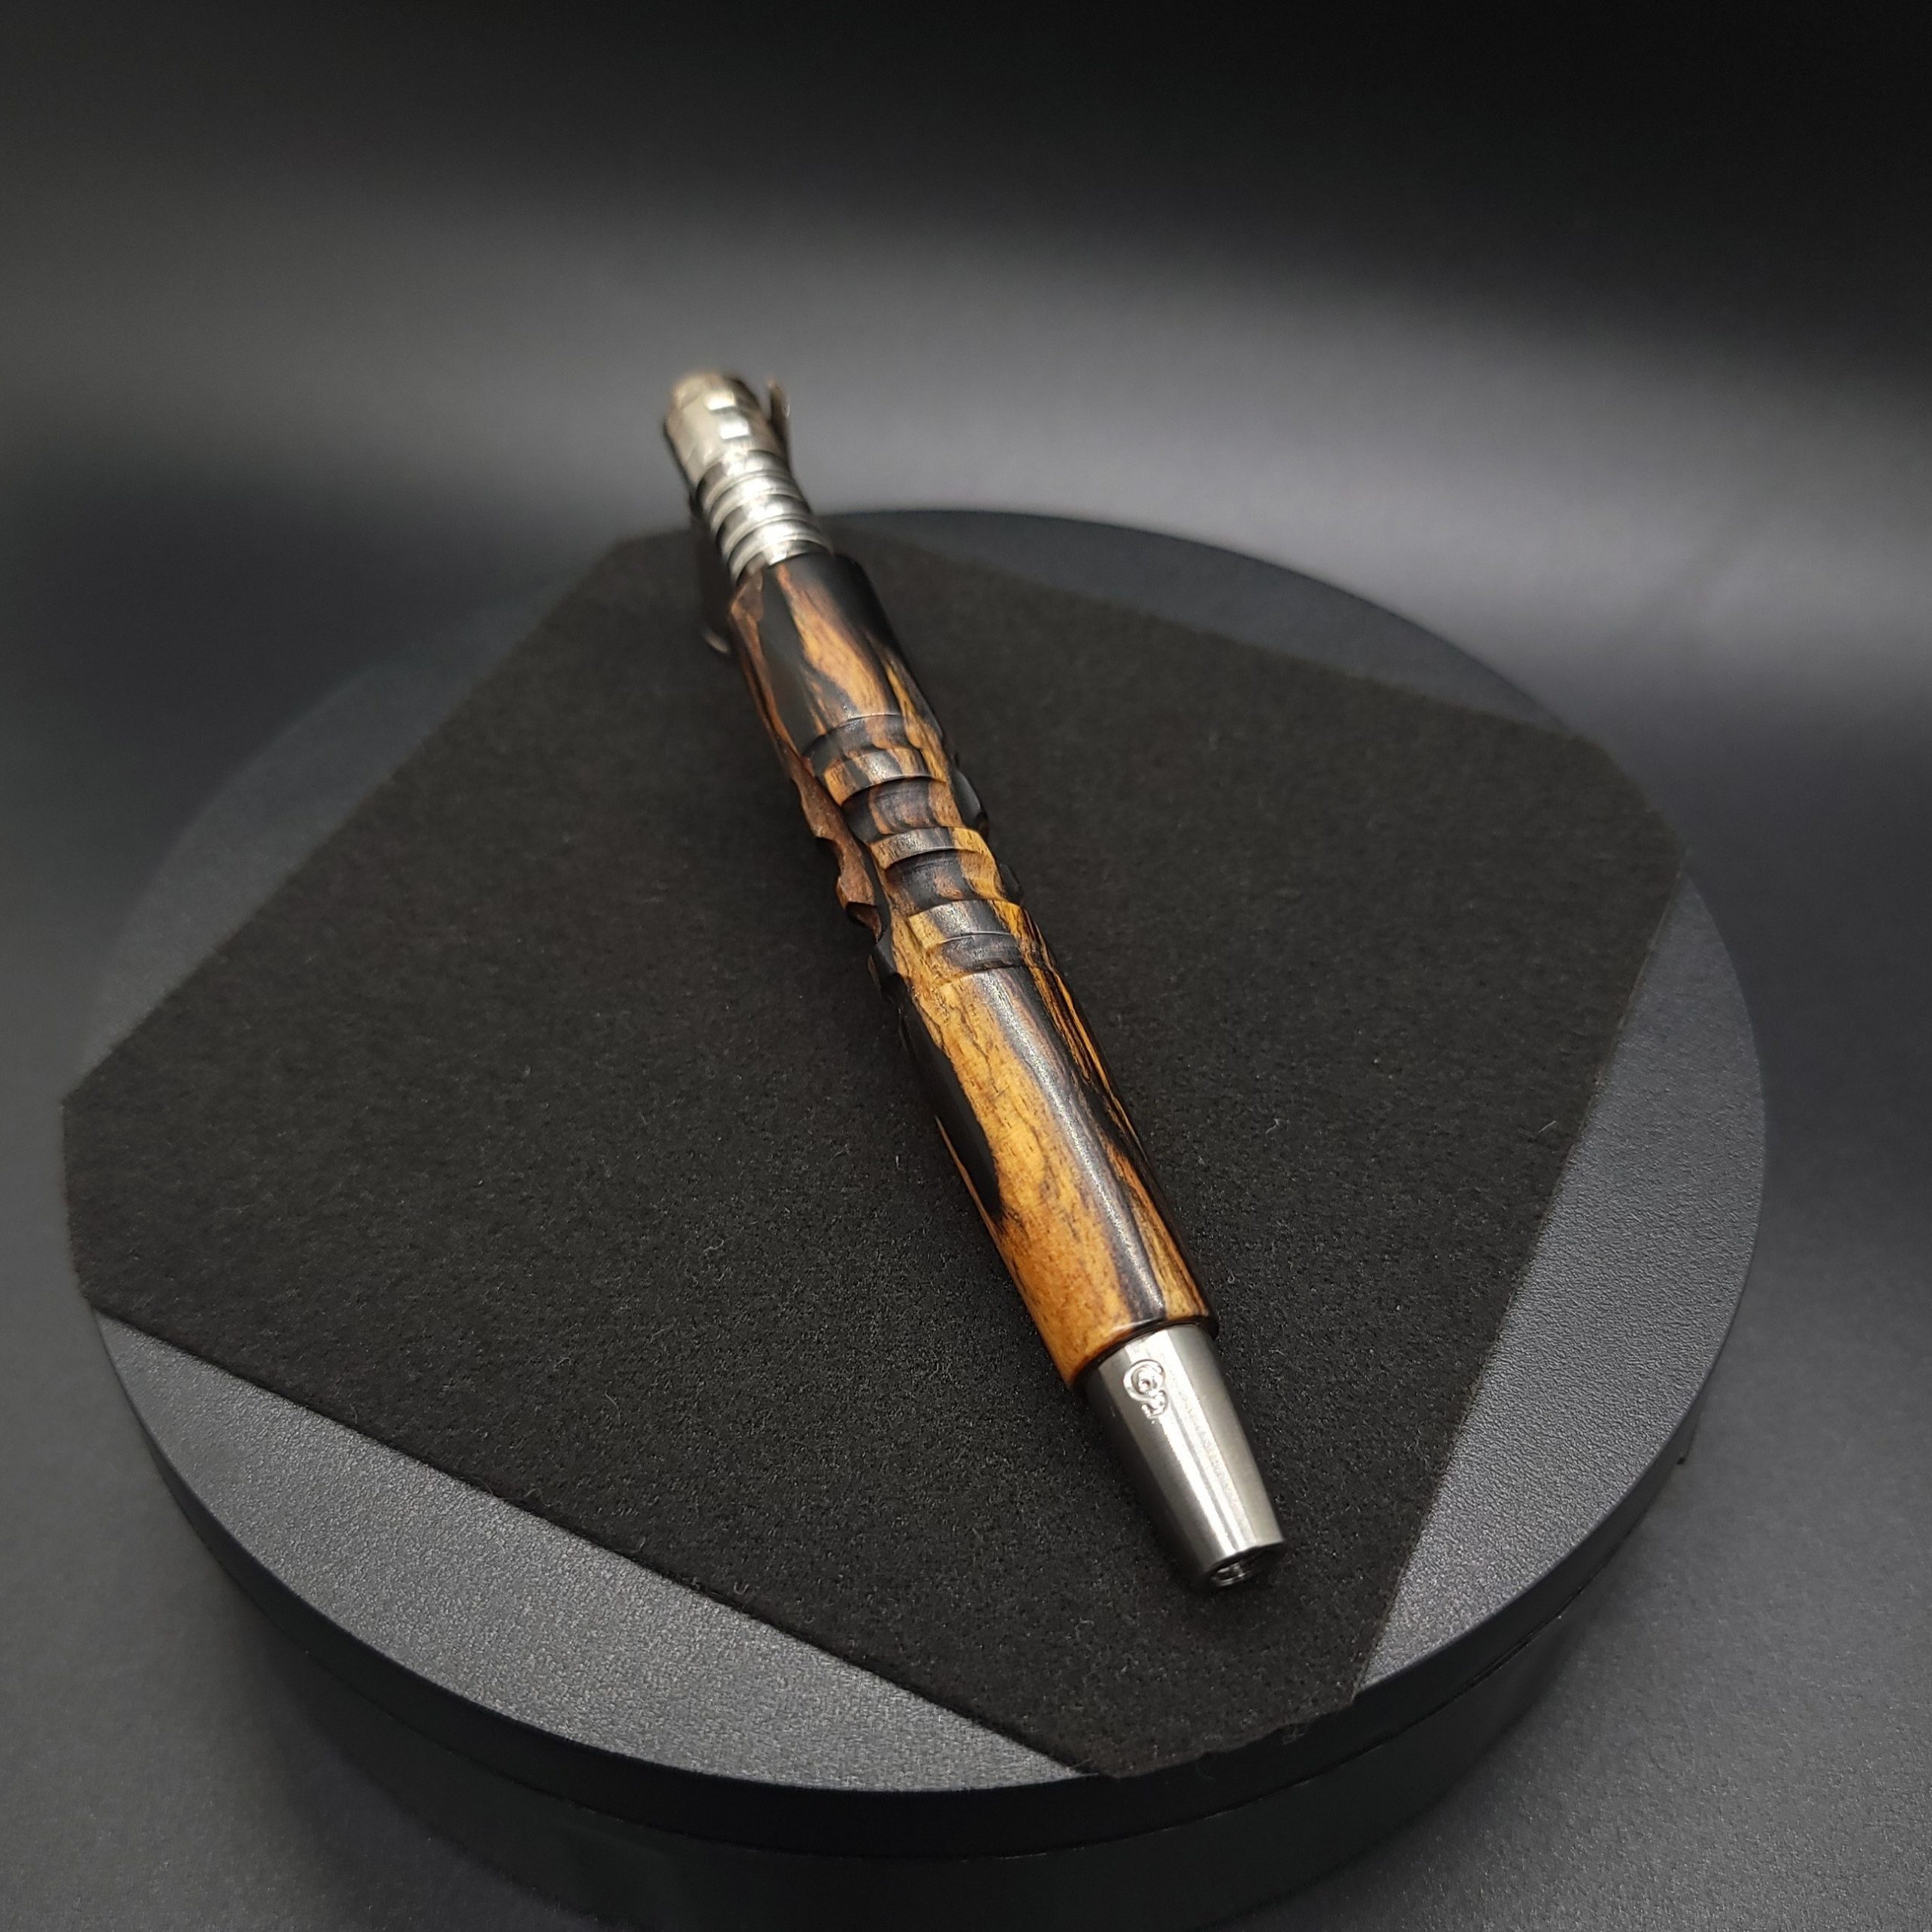 This image portrays The Downward Spiral-B & W Ebony-XL Dynavap Stem-NEW! by Dovetail Woodwork.